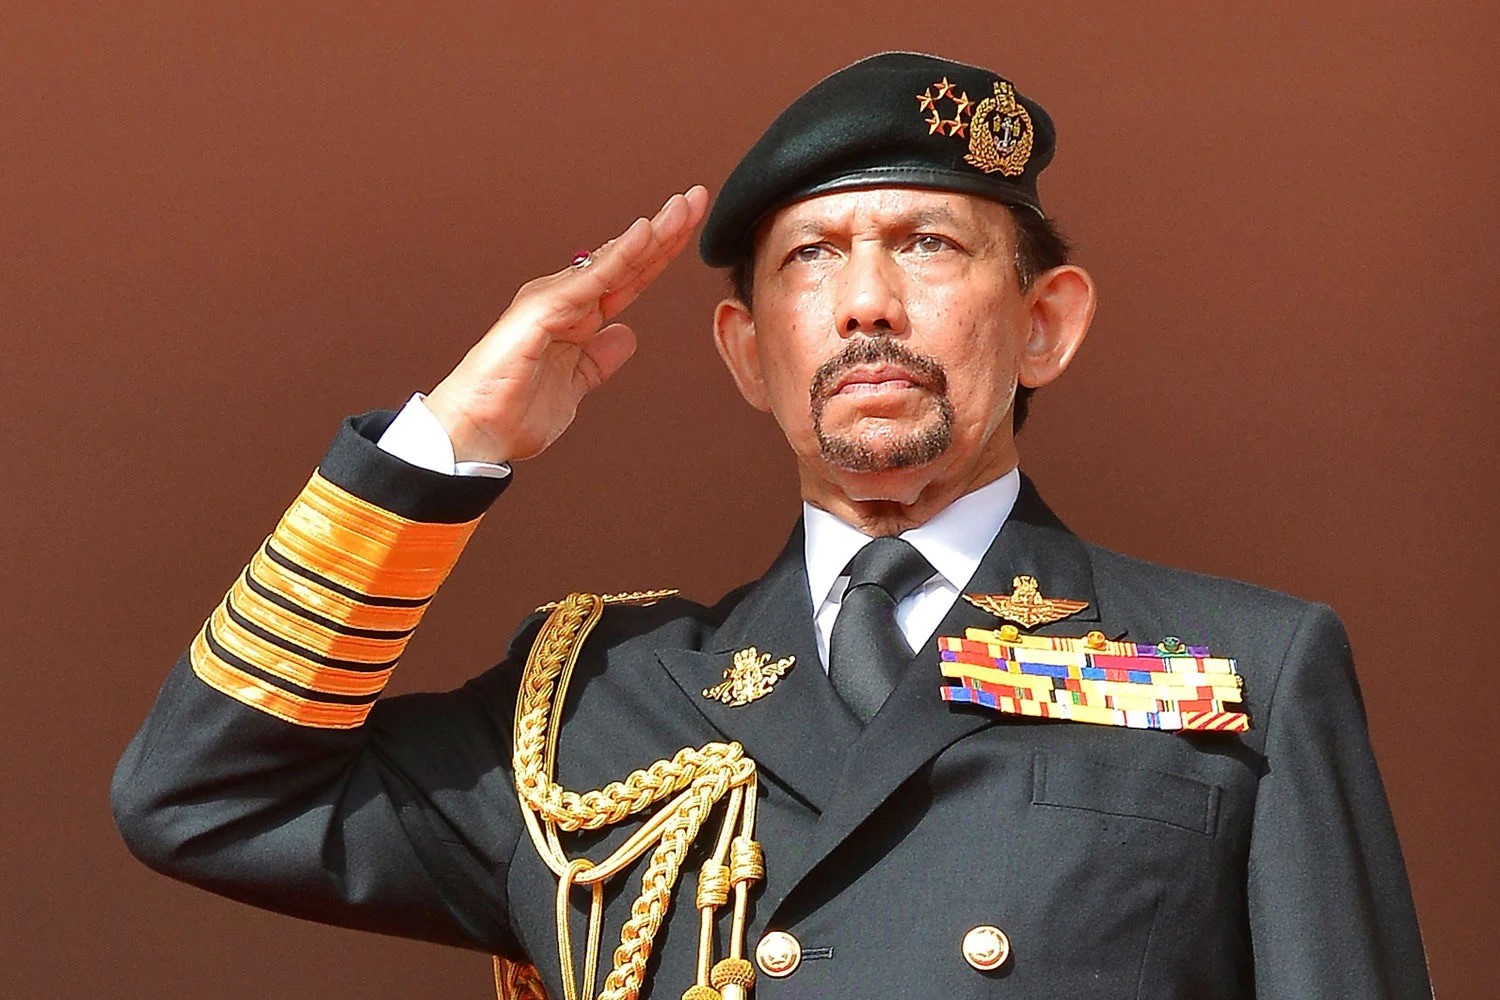 13-mind-blowing-facts-about-sultan-of-brunei